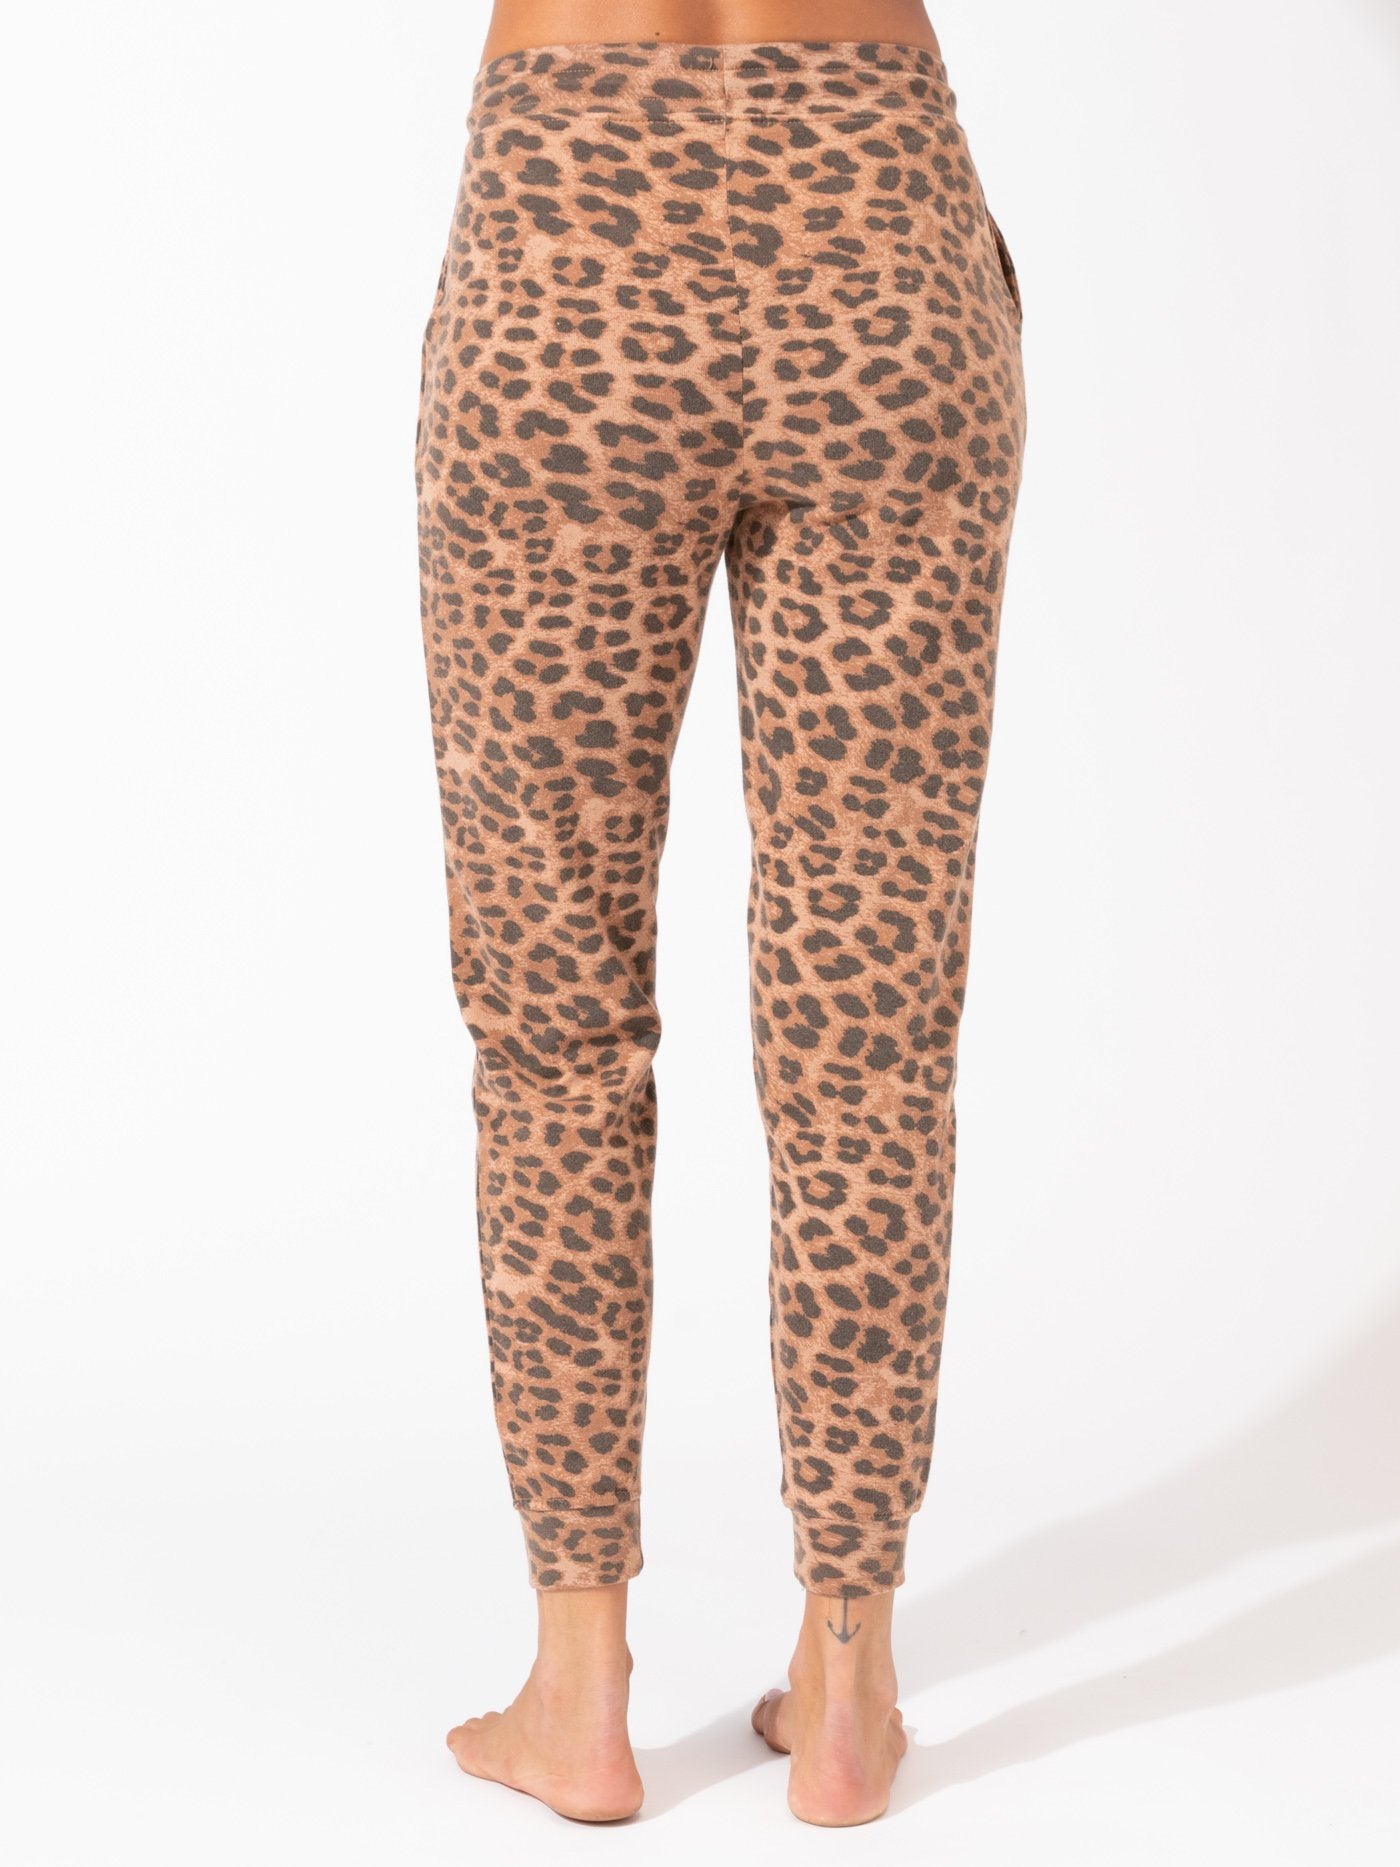 Tanory Leopard Print Jogger Womens Bottoms Pants Threads 4 Thought 